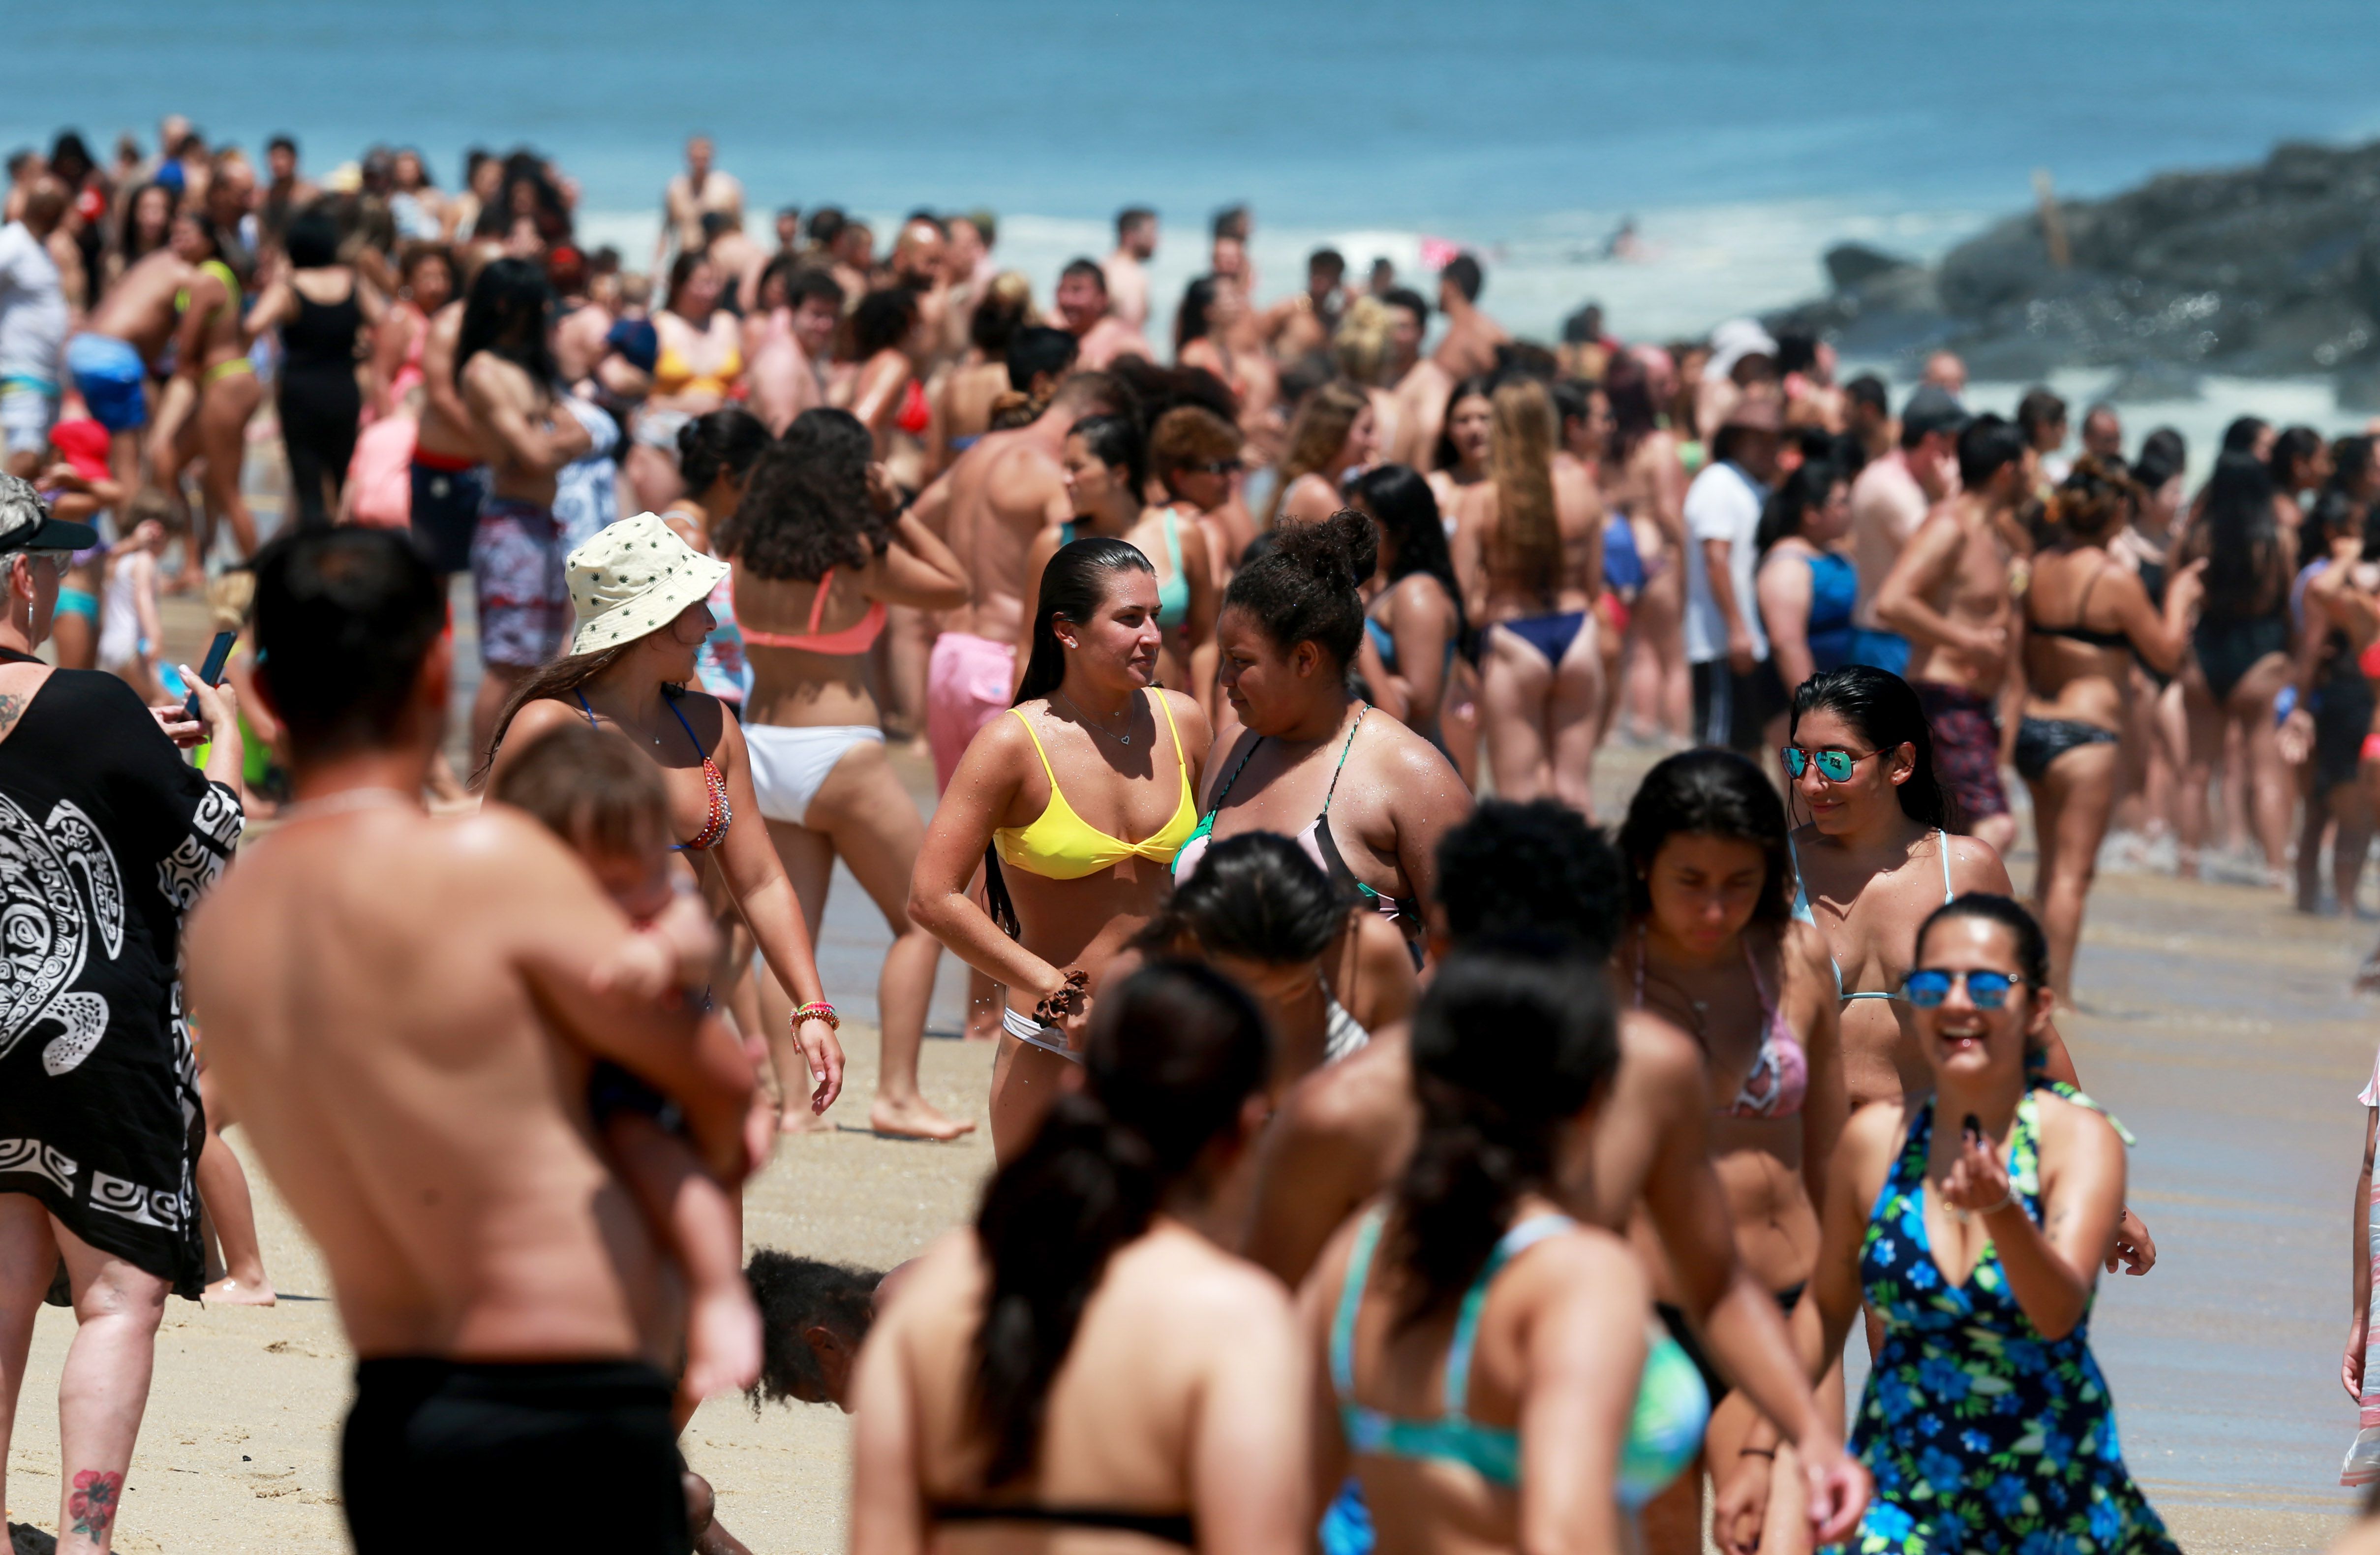 Overcrowded beach scene at the Jersey Shore